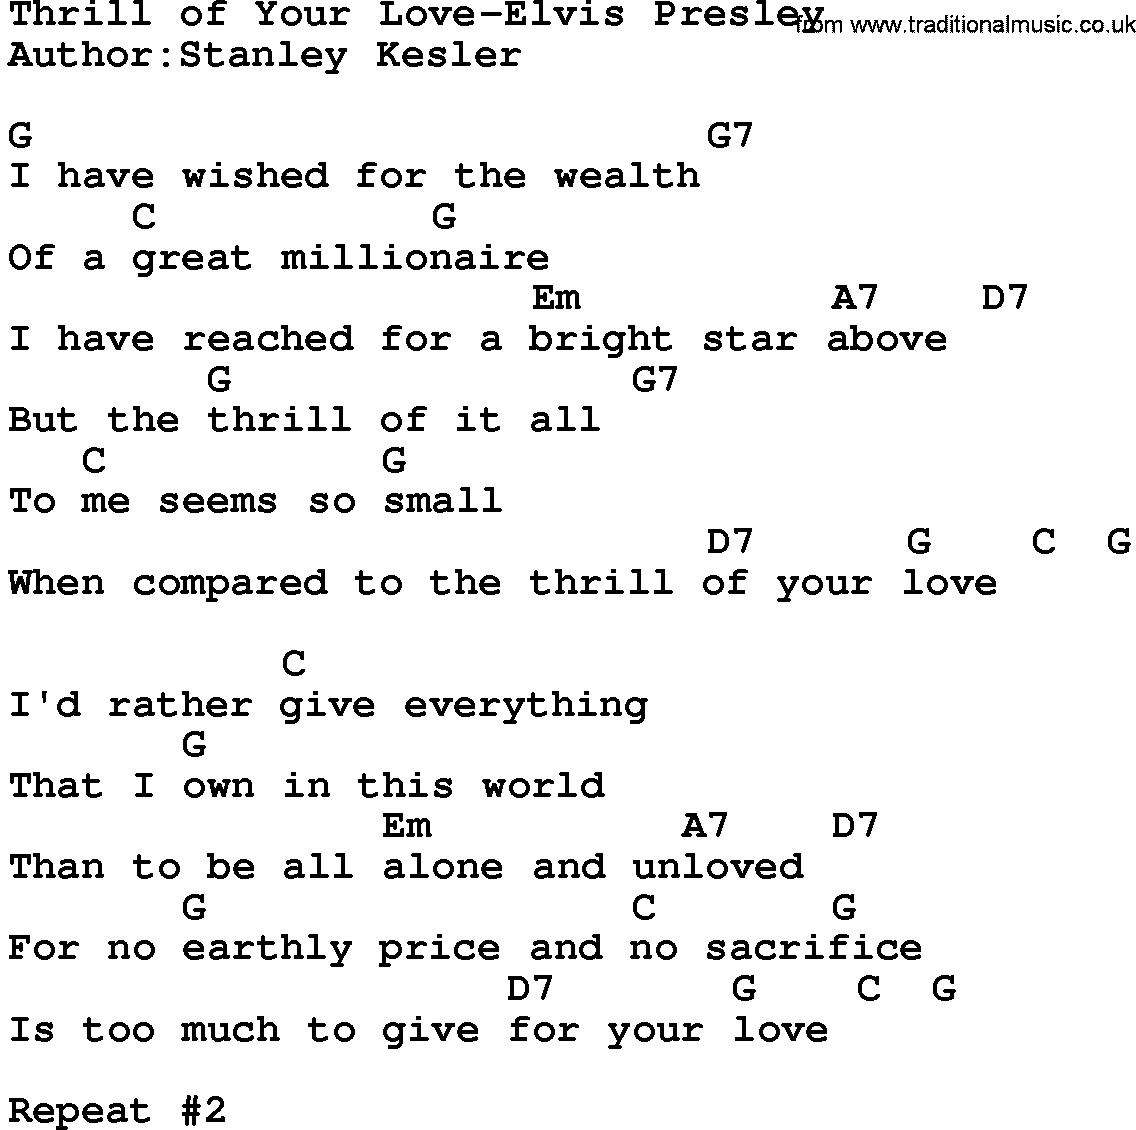 Country music song: Thrill Of Your Love-Elvis Presley lyrics and chords